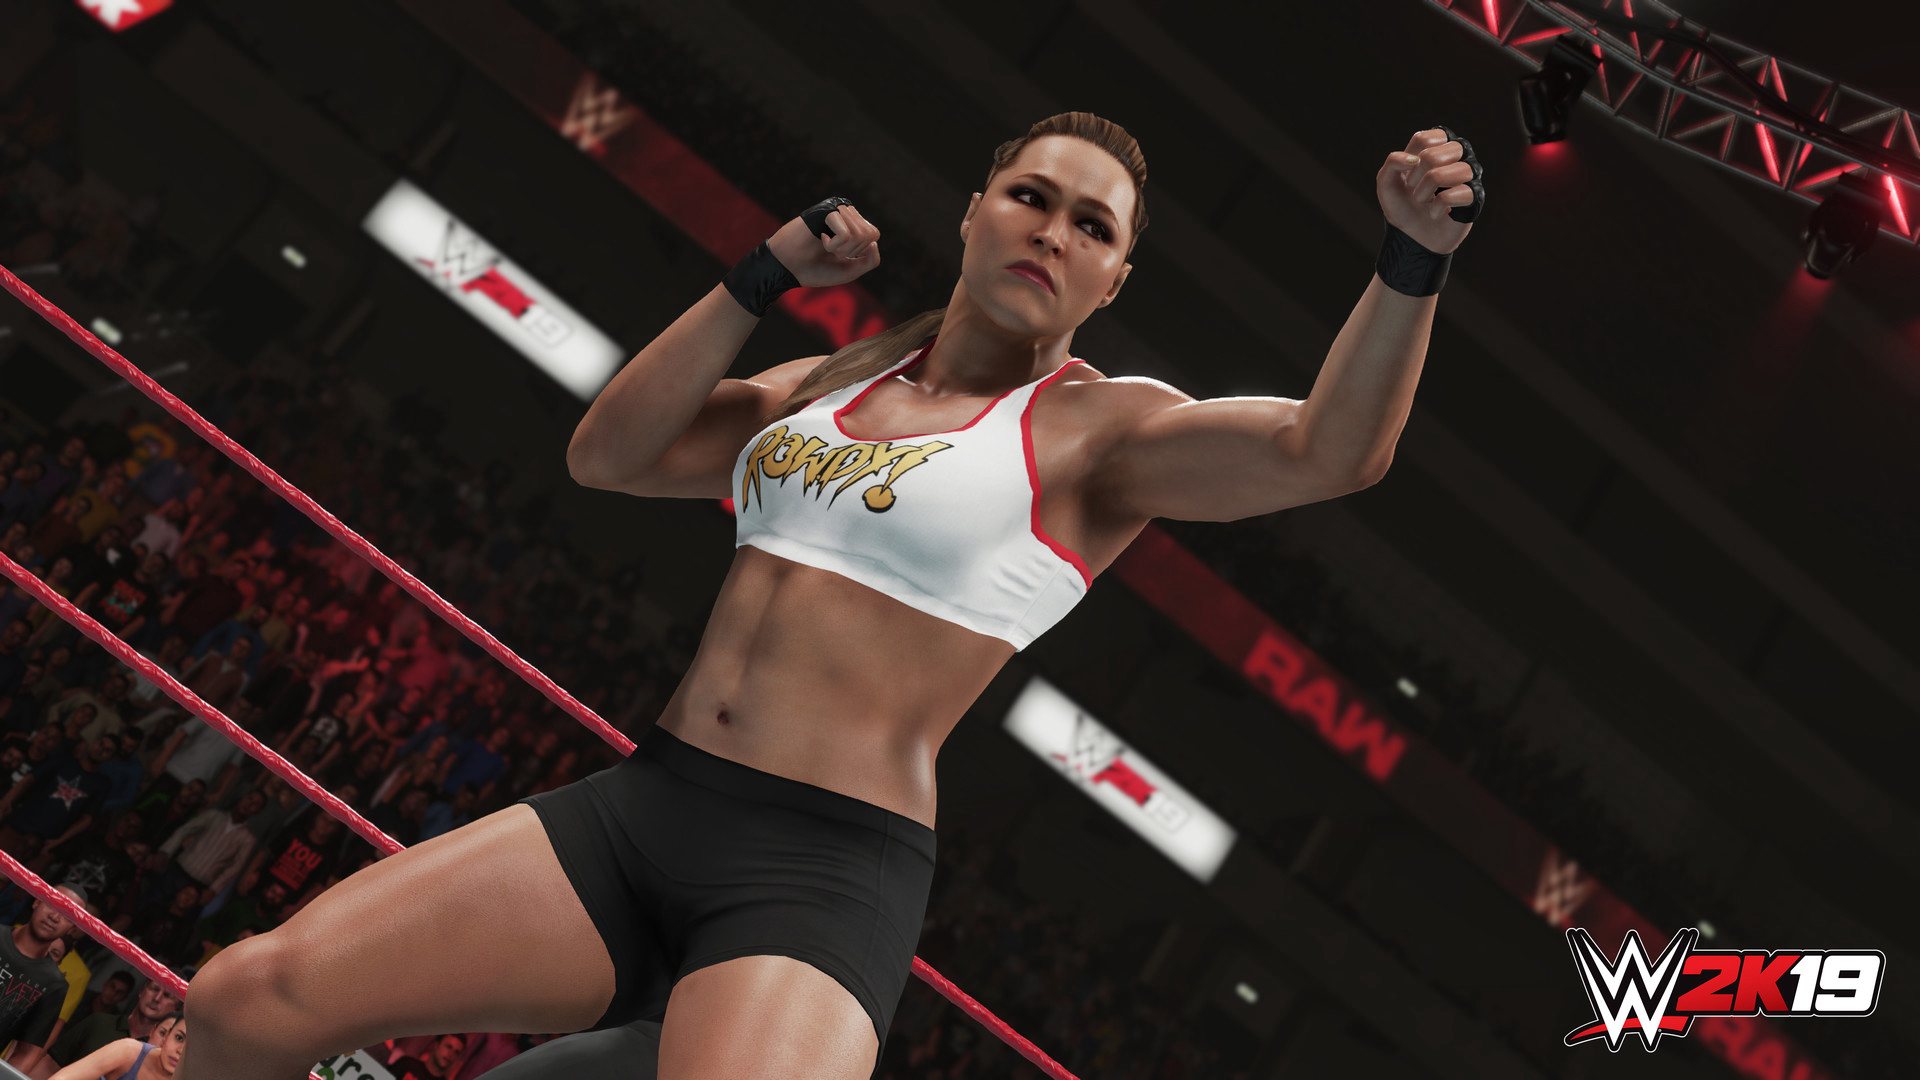 WWE 2K19 PlayStation 4 Account pixelpuffin.net Activation Link, 15.81 usd